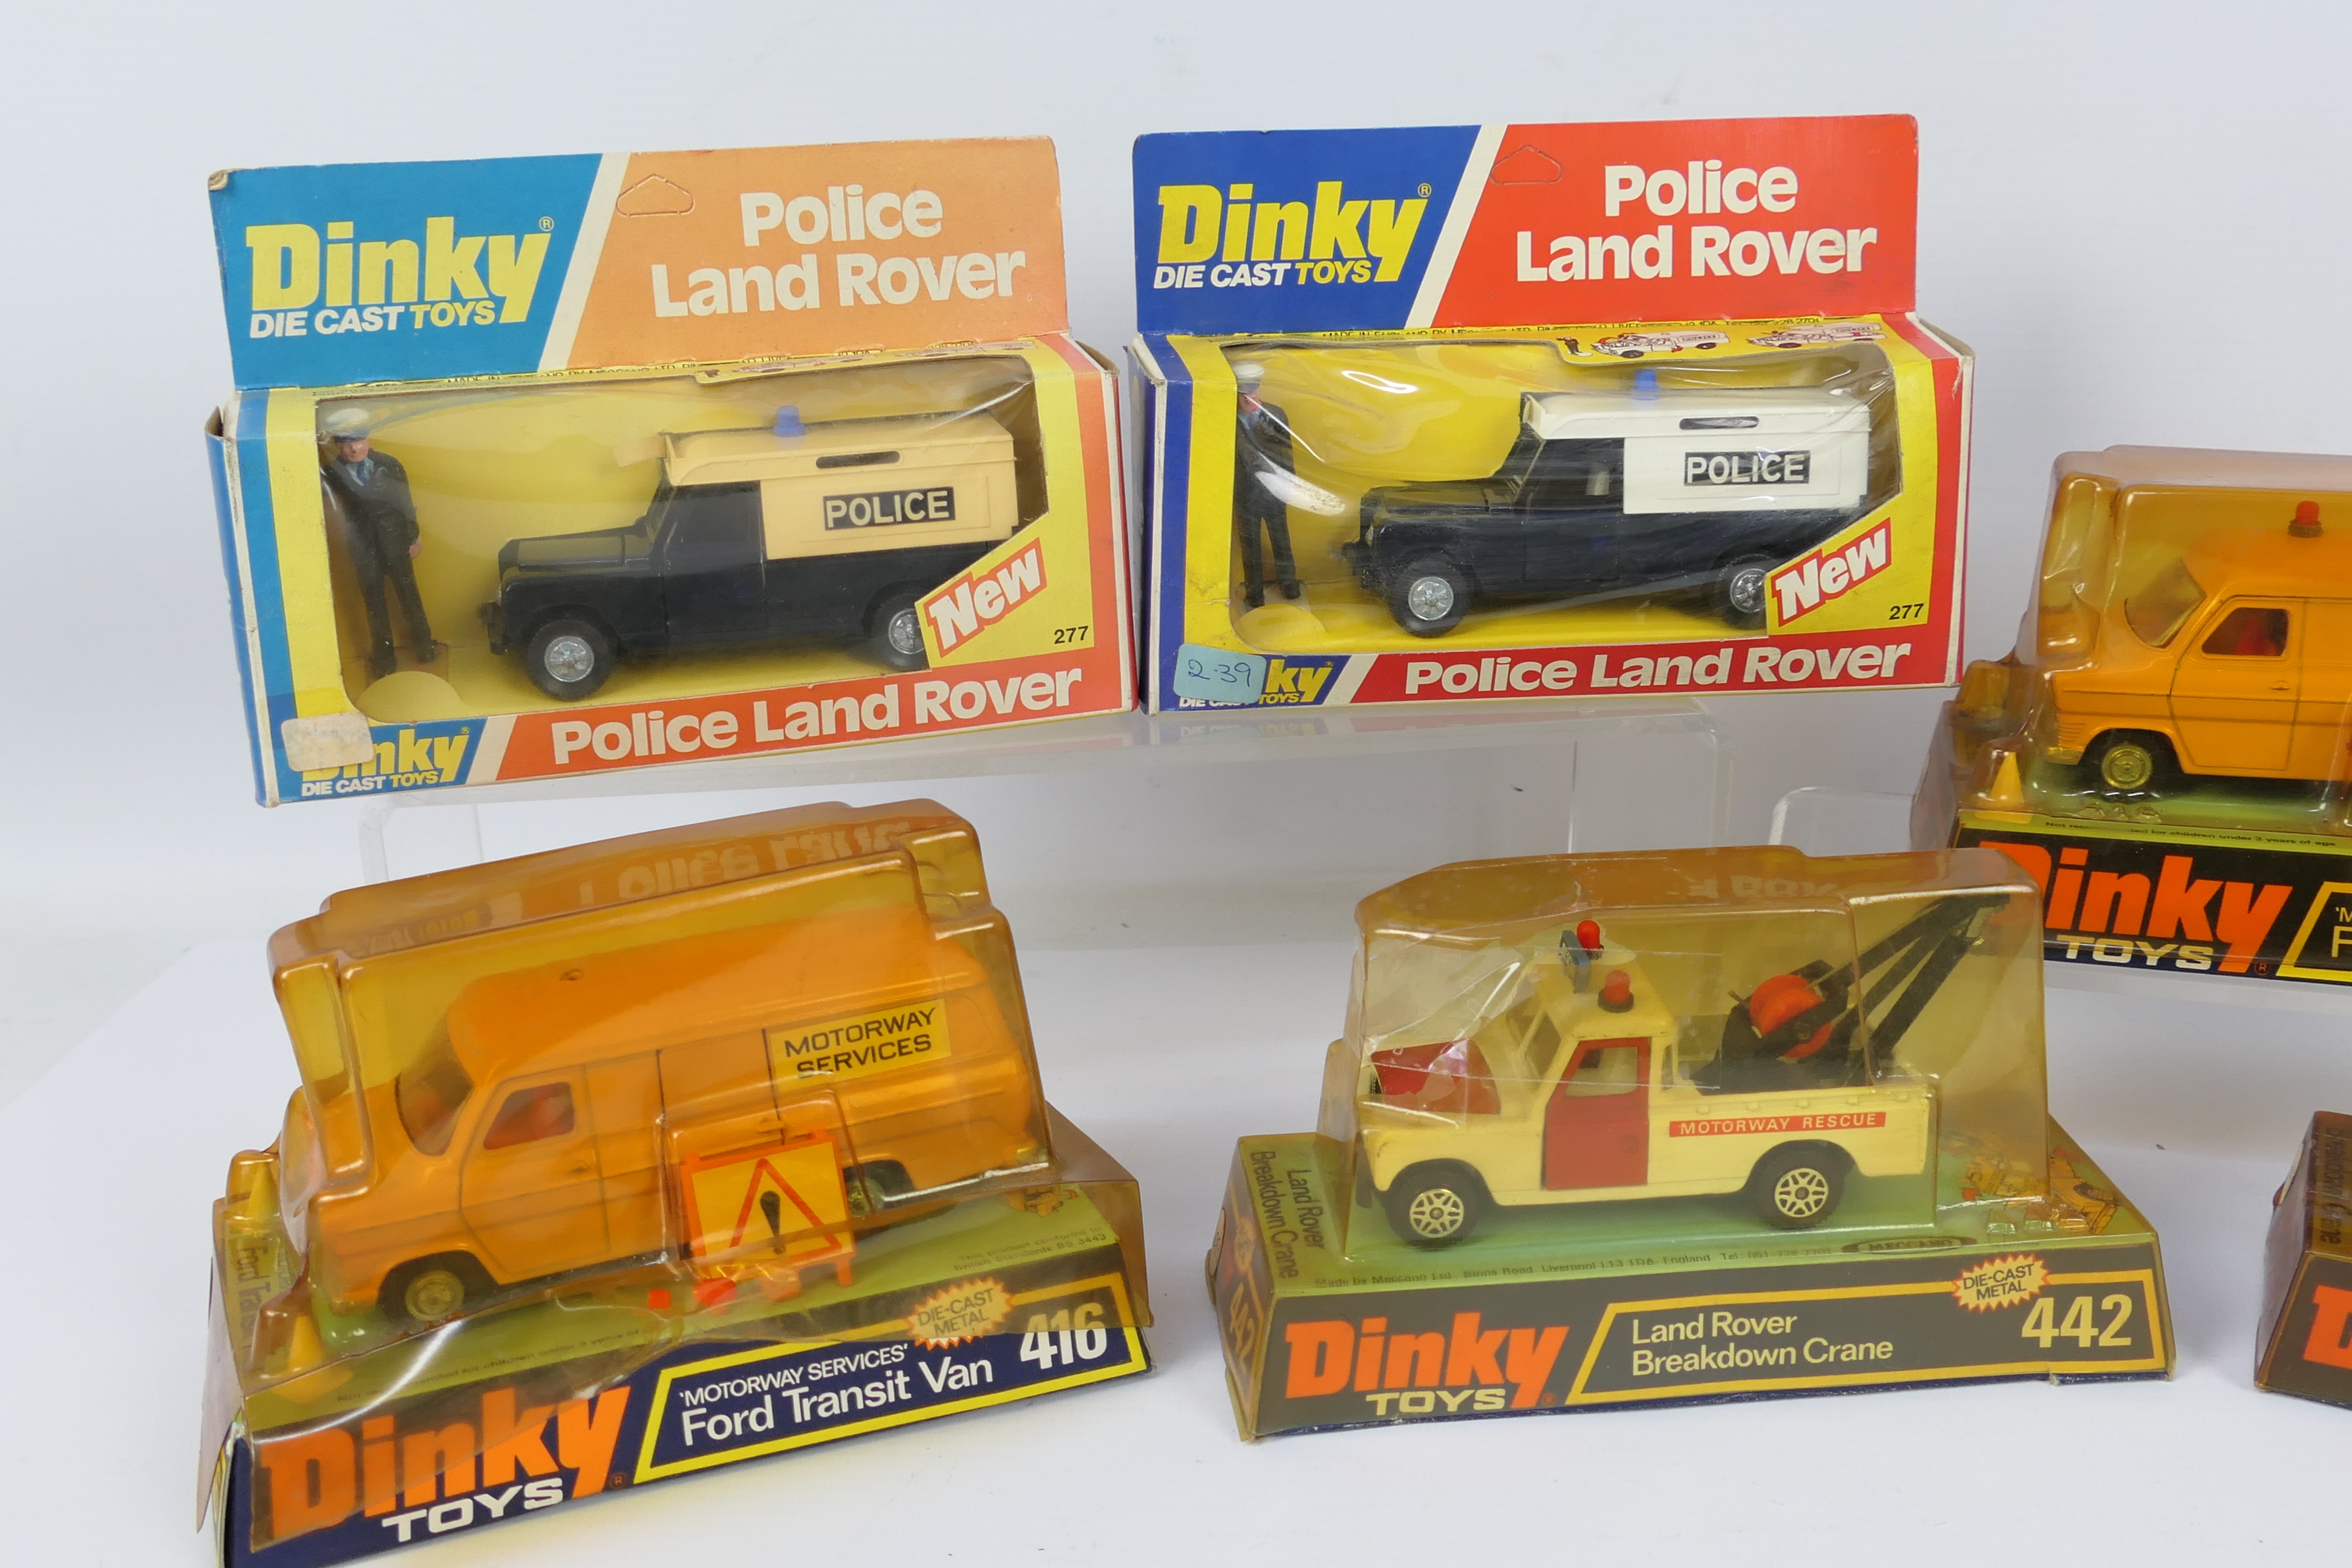 Dinky - Unsold Shop Stock - 6 x boxed models, 2 x Ford Transit Vans # 416, - Image 2 of 3